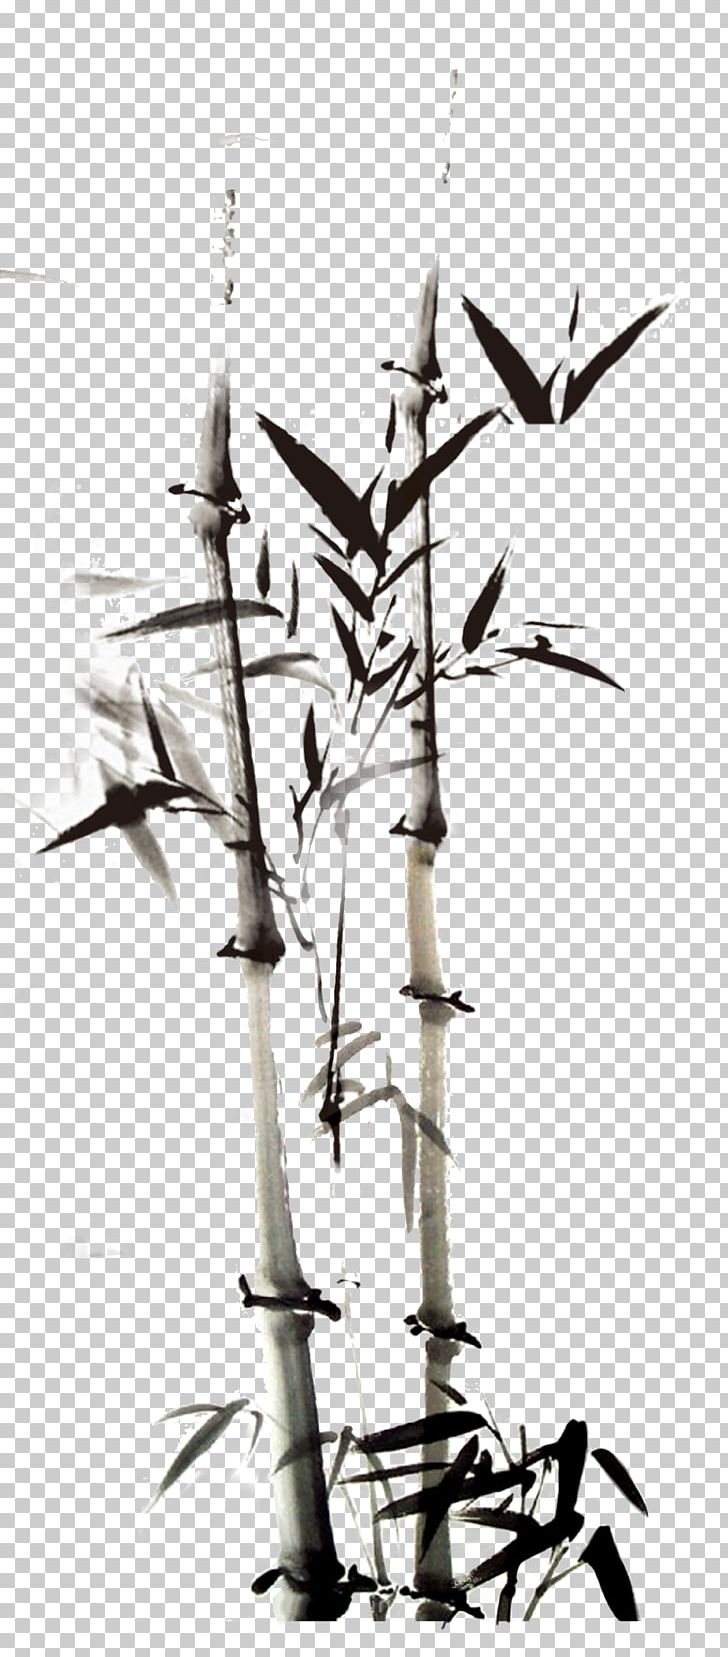 Ink Wash Painting Bamboo PNG, Clipart, Bamboo 19 0 1, Bamboo Border, Bamboo Frame, Bamboo Leaf, Bamboo Leaves Free PNG Download